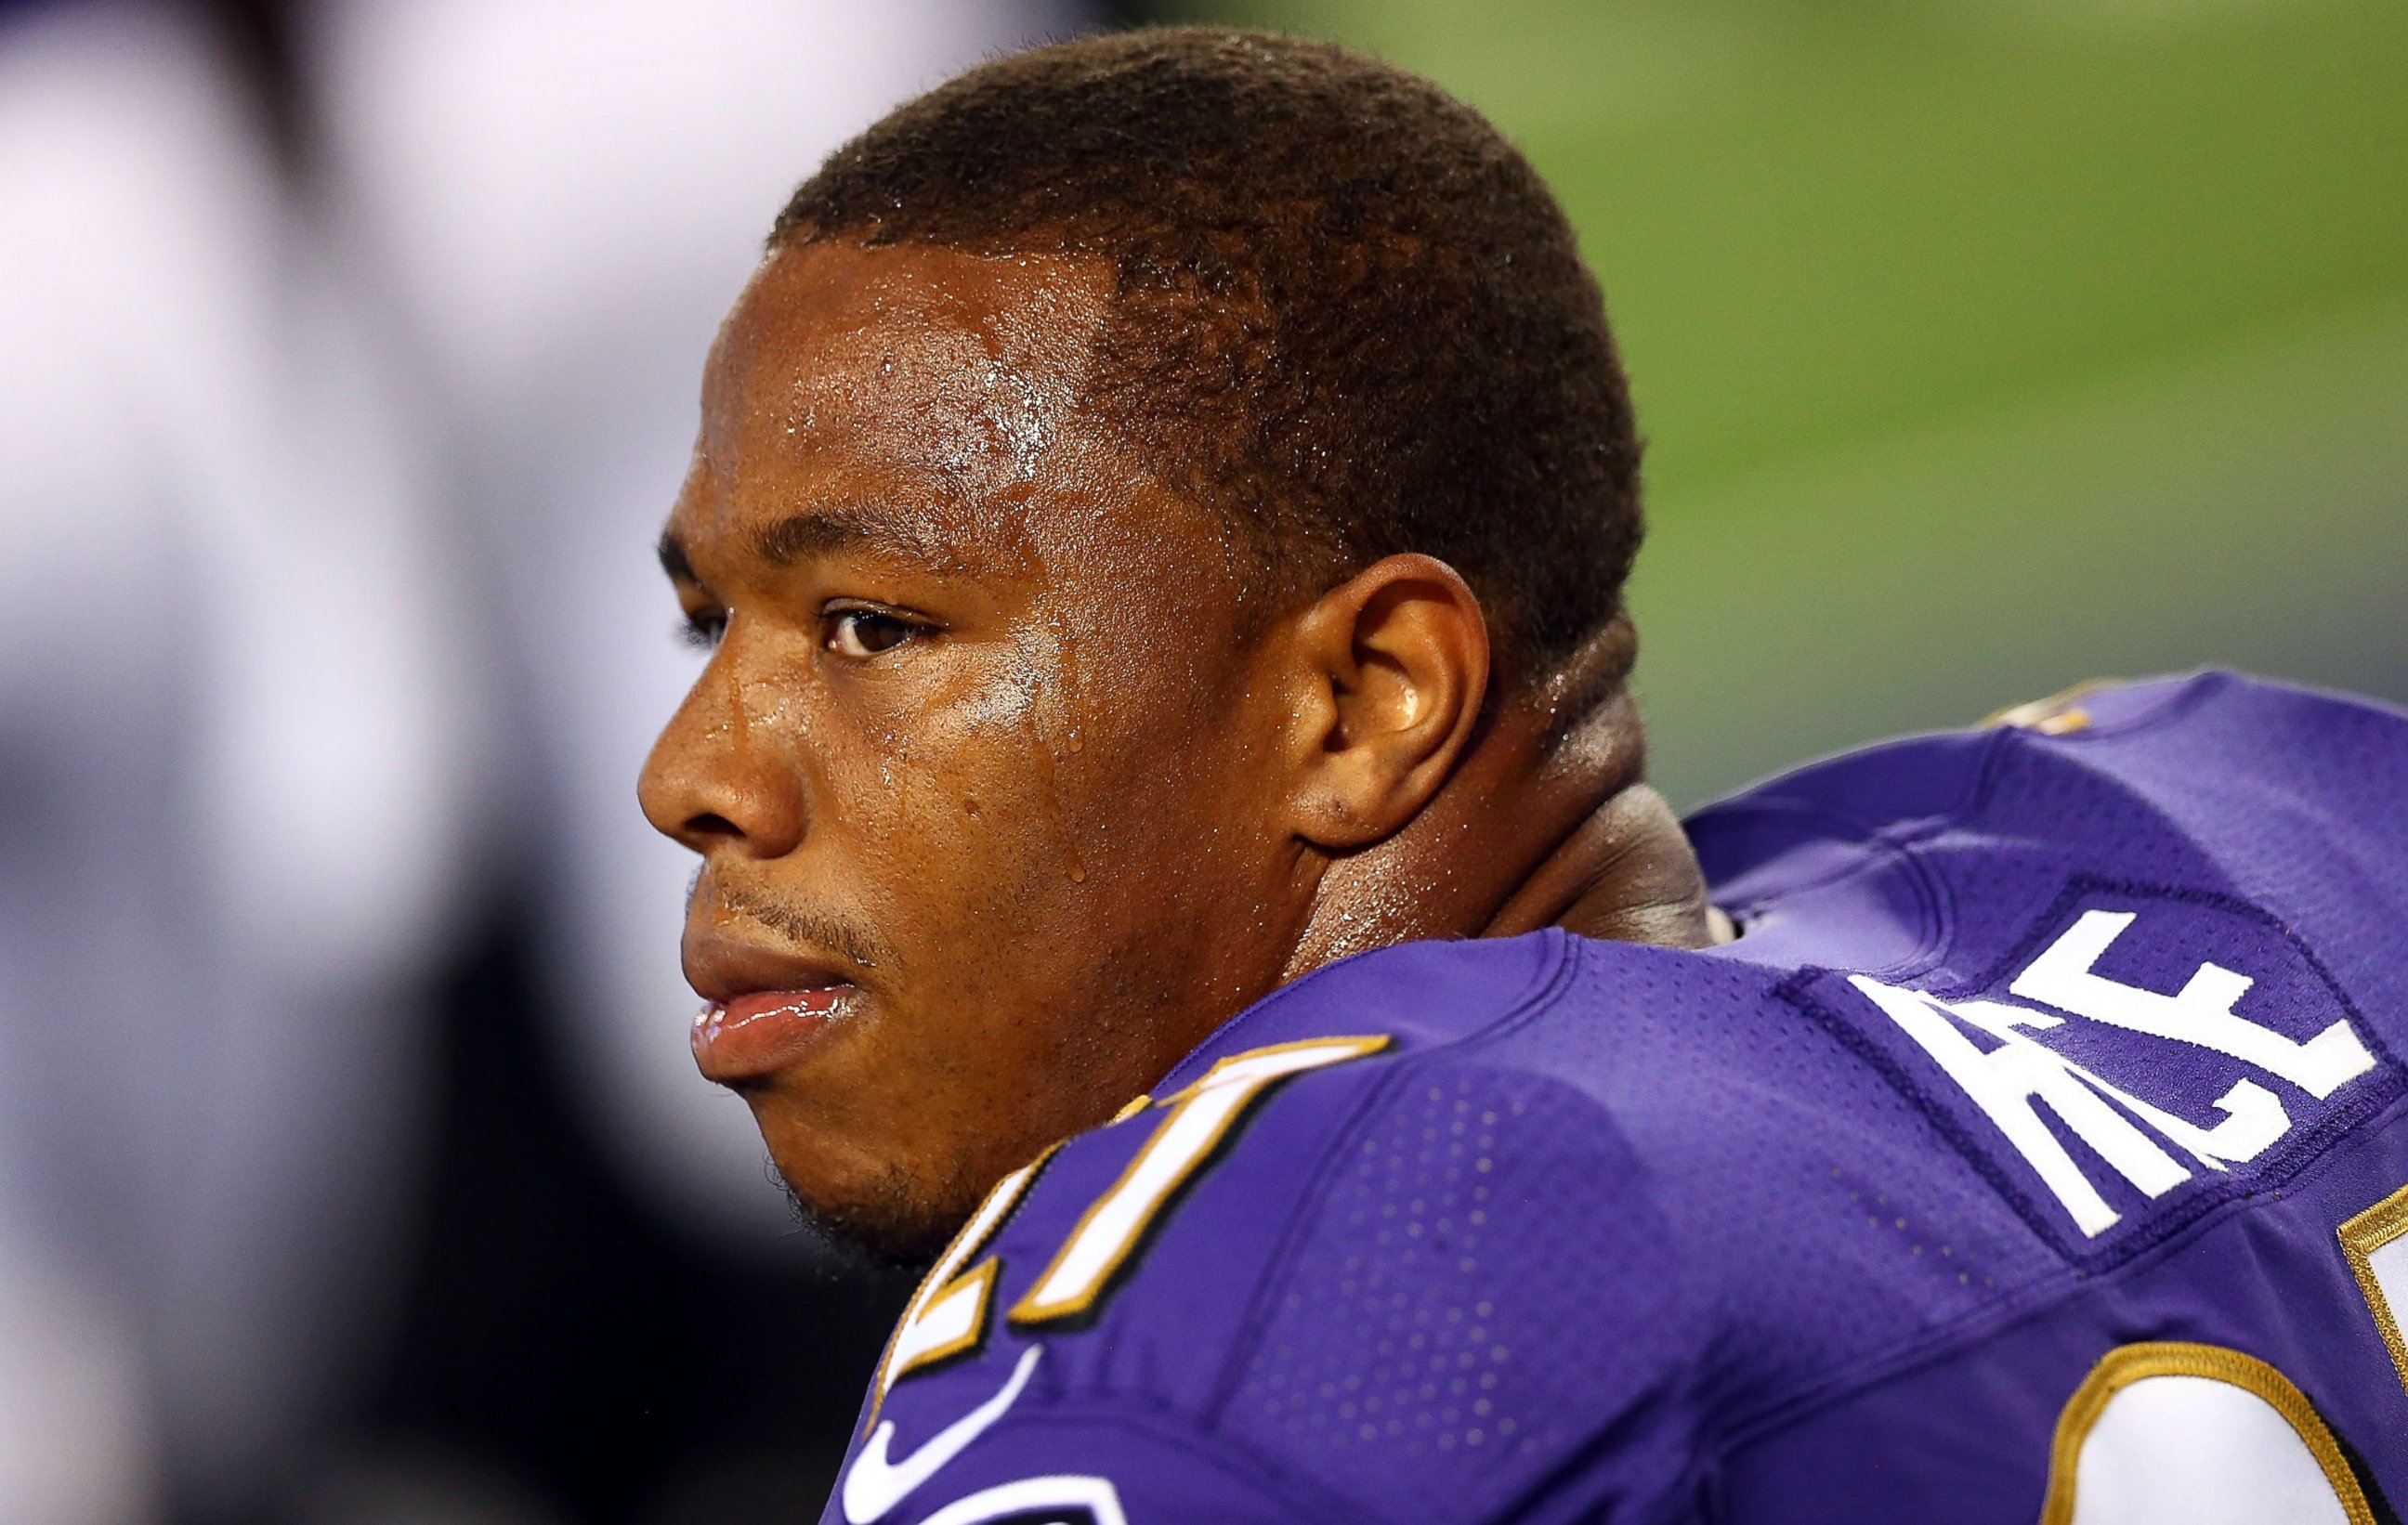 PHOTO: Ray Rice of the Baltimore Ravens sits on the bench against the Dallas Cowboys at AT&T Stadium on Aug. 16, 2014 in Arlington, Texas.